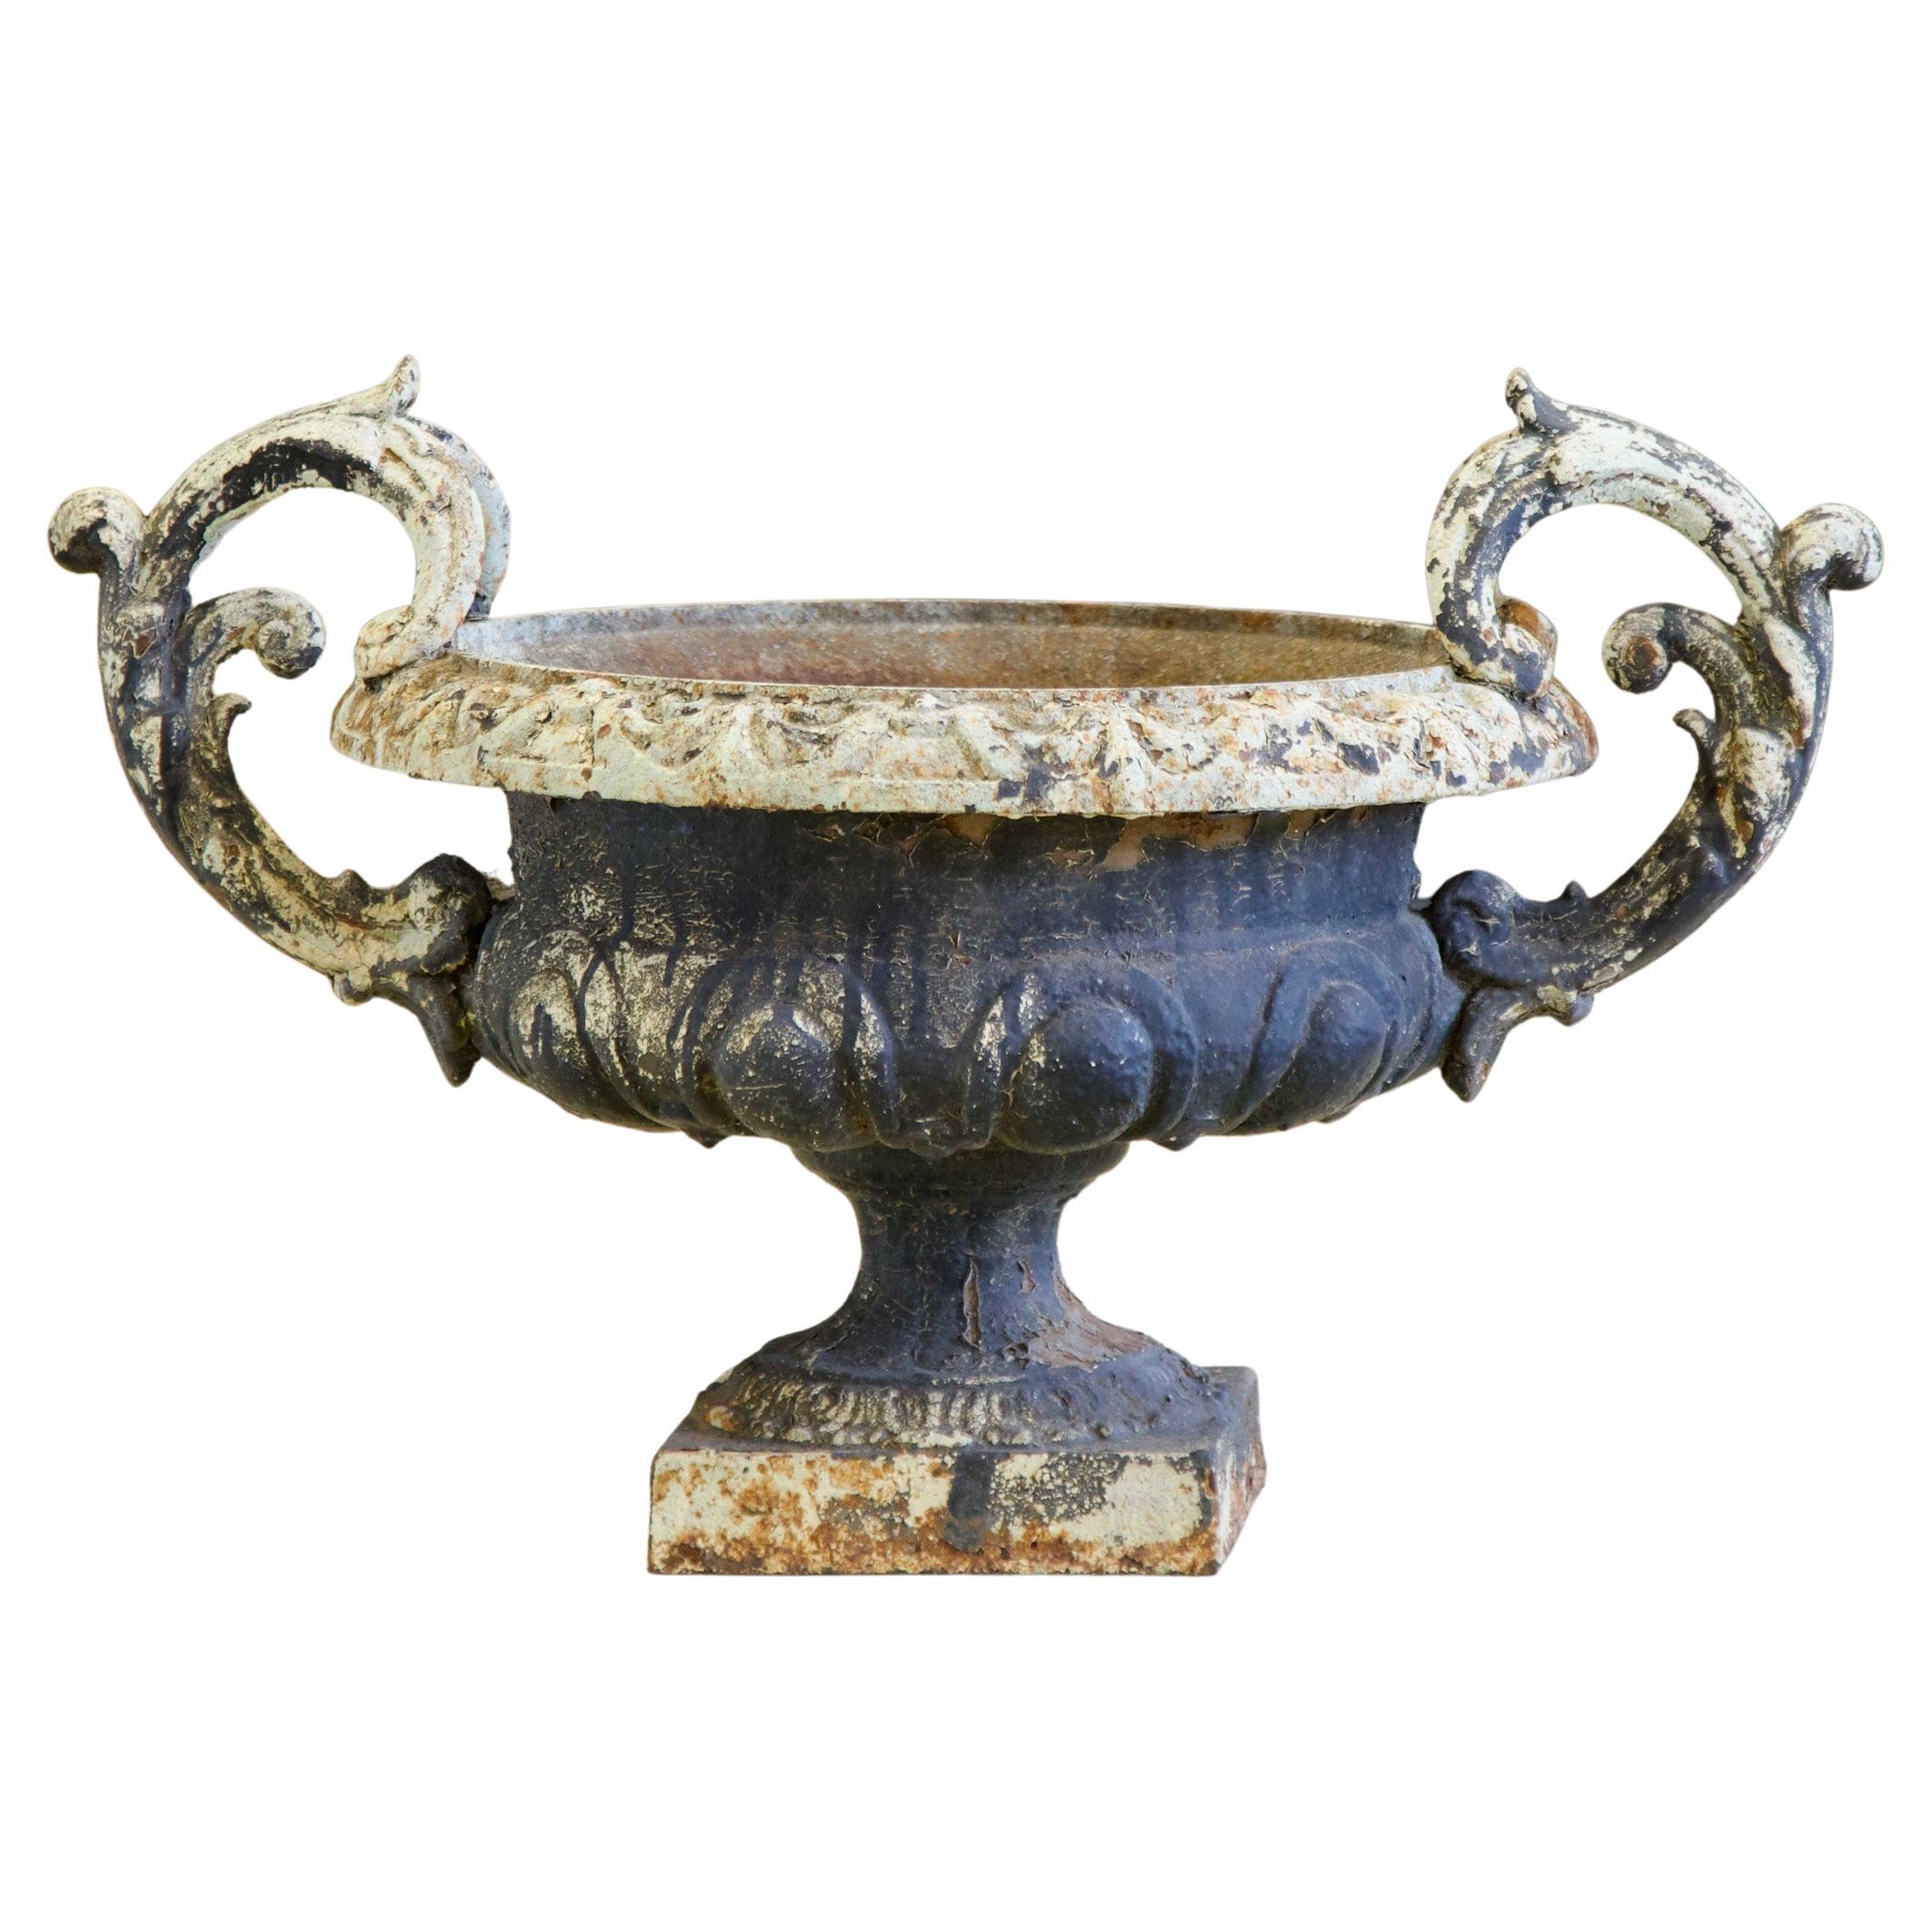 19th French century cast iron urns. Scrolled decorative handles.
Very nice patina.
 